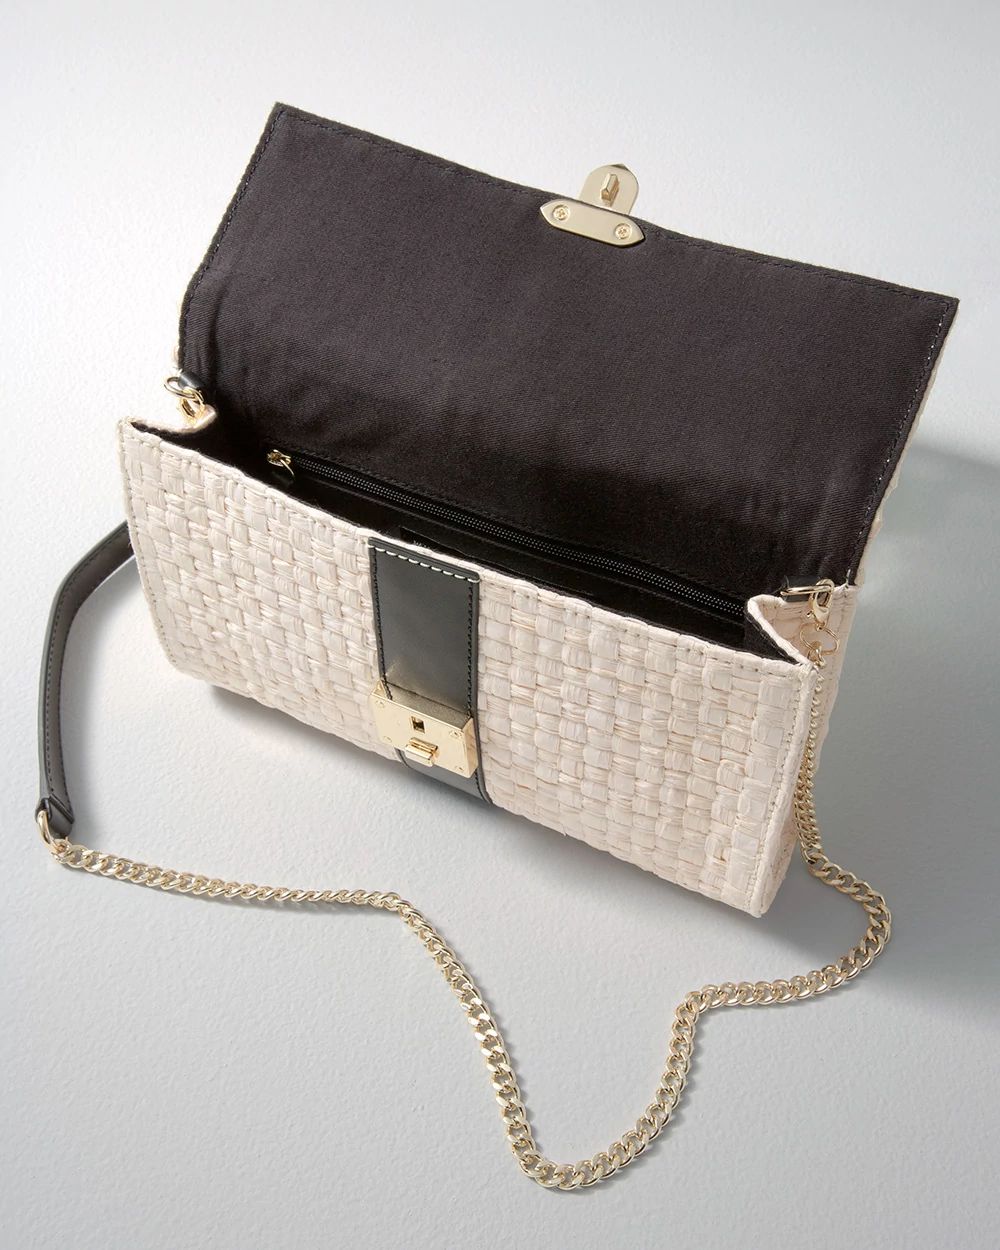 Raffia + Leather Clutch click to view larger image.